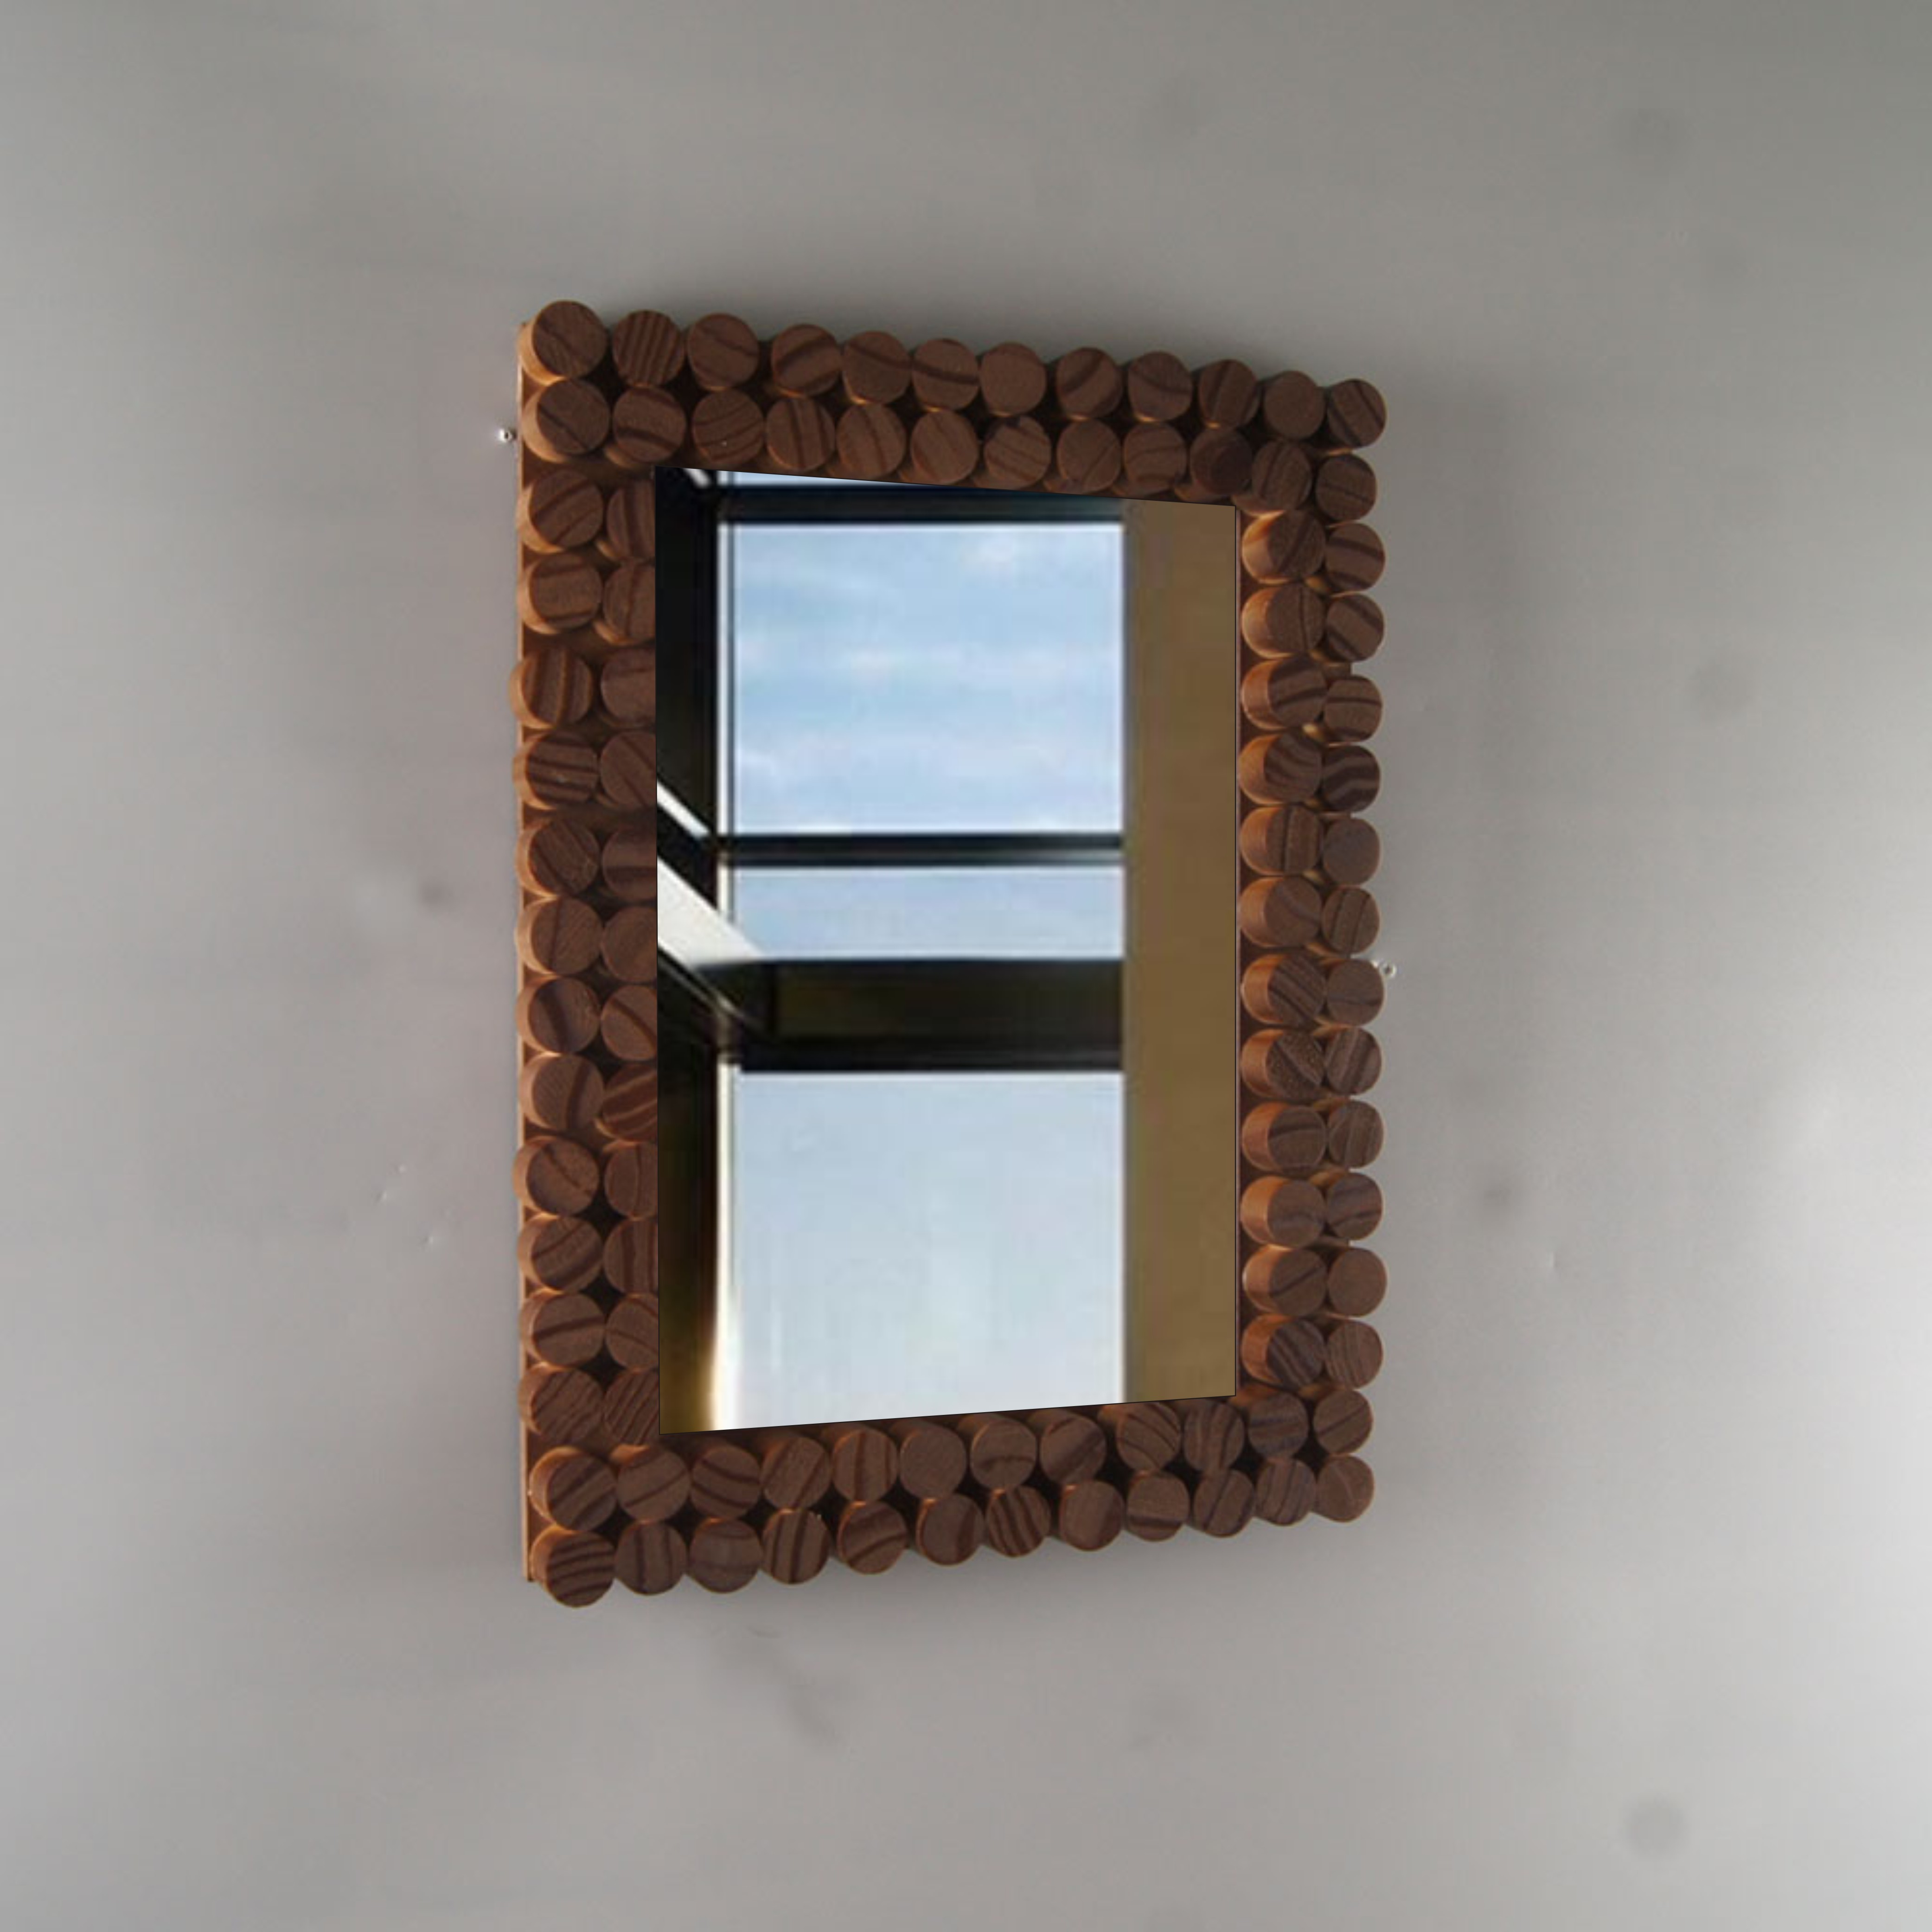 Wood Frame Accent Mirror, Rustic Farmhouse Style Decorative Wall Mirror